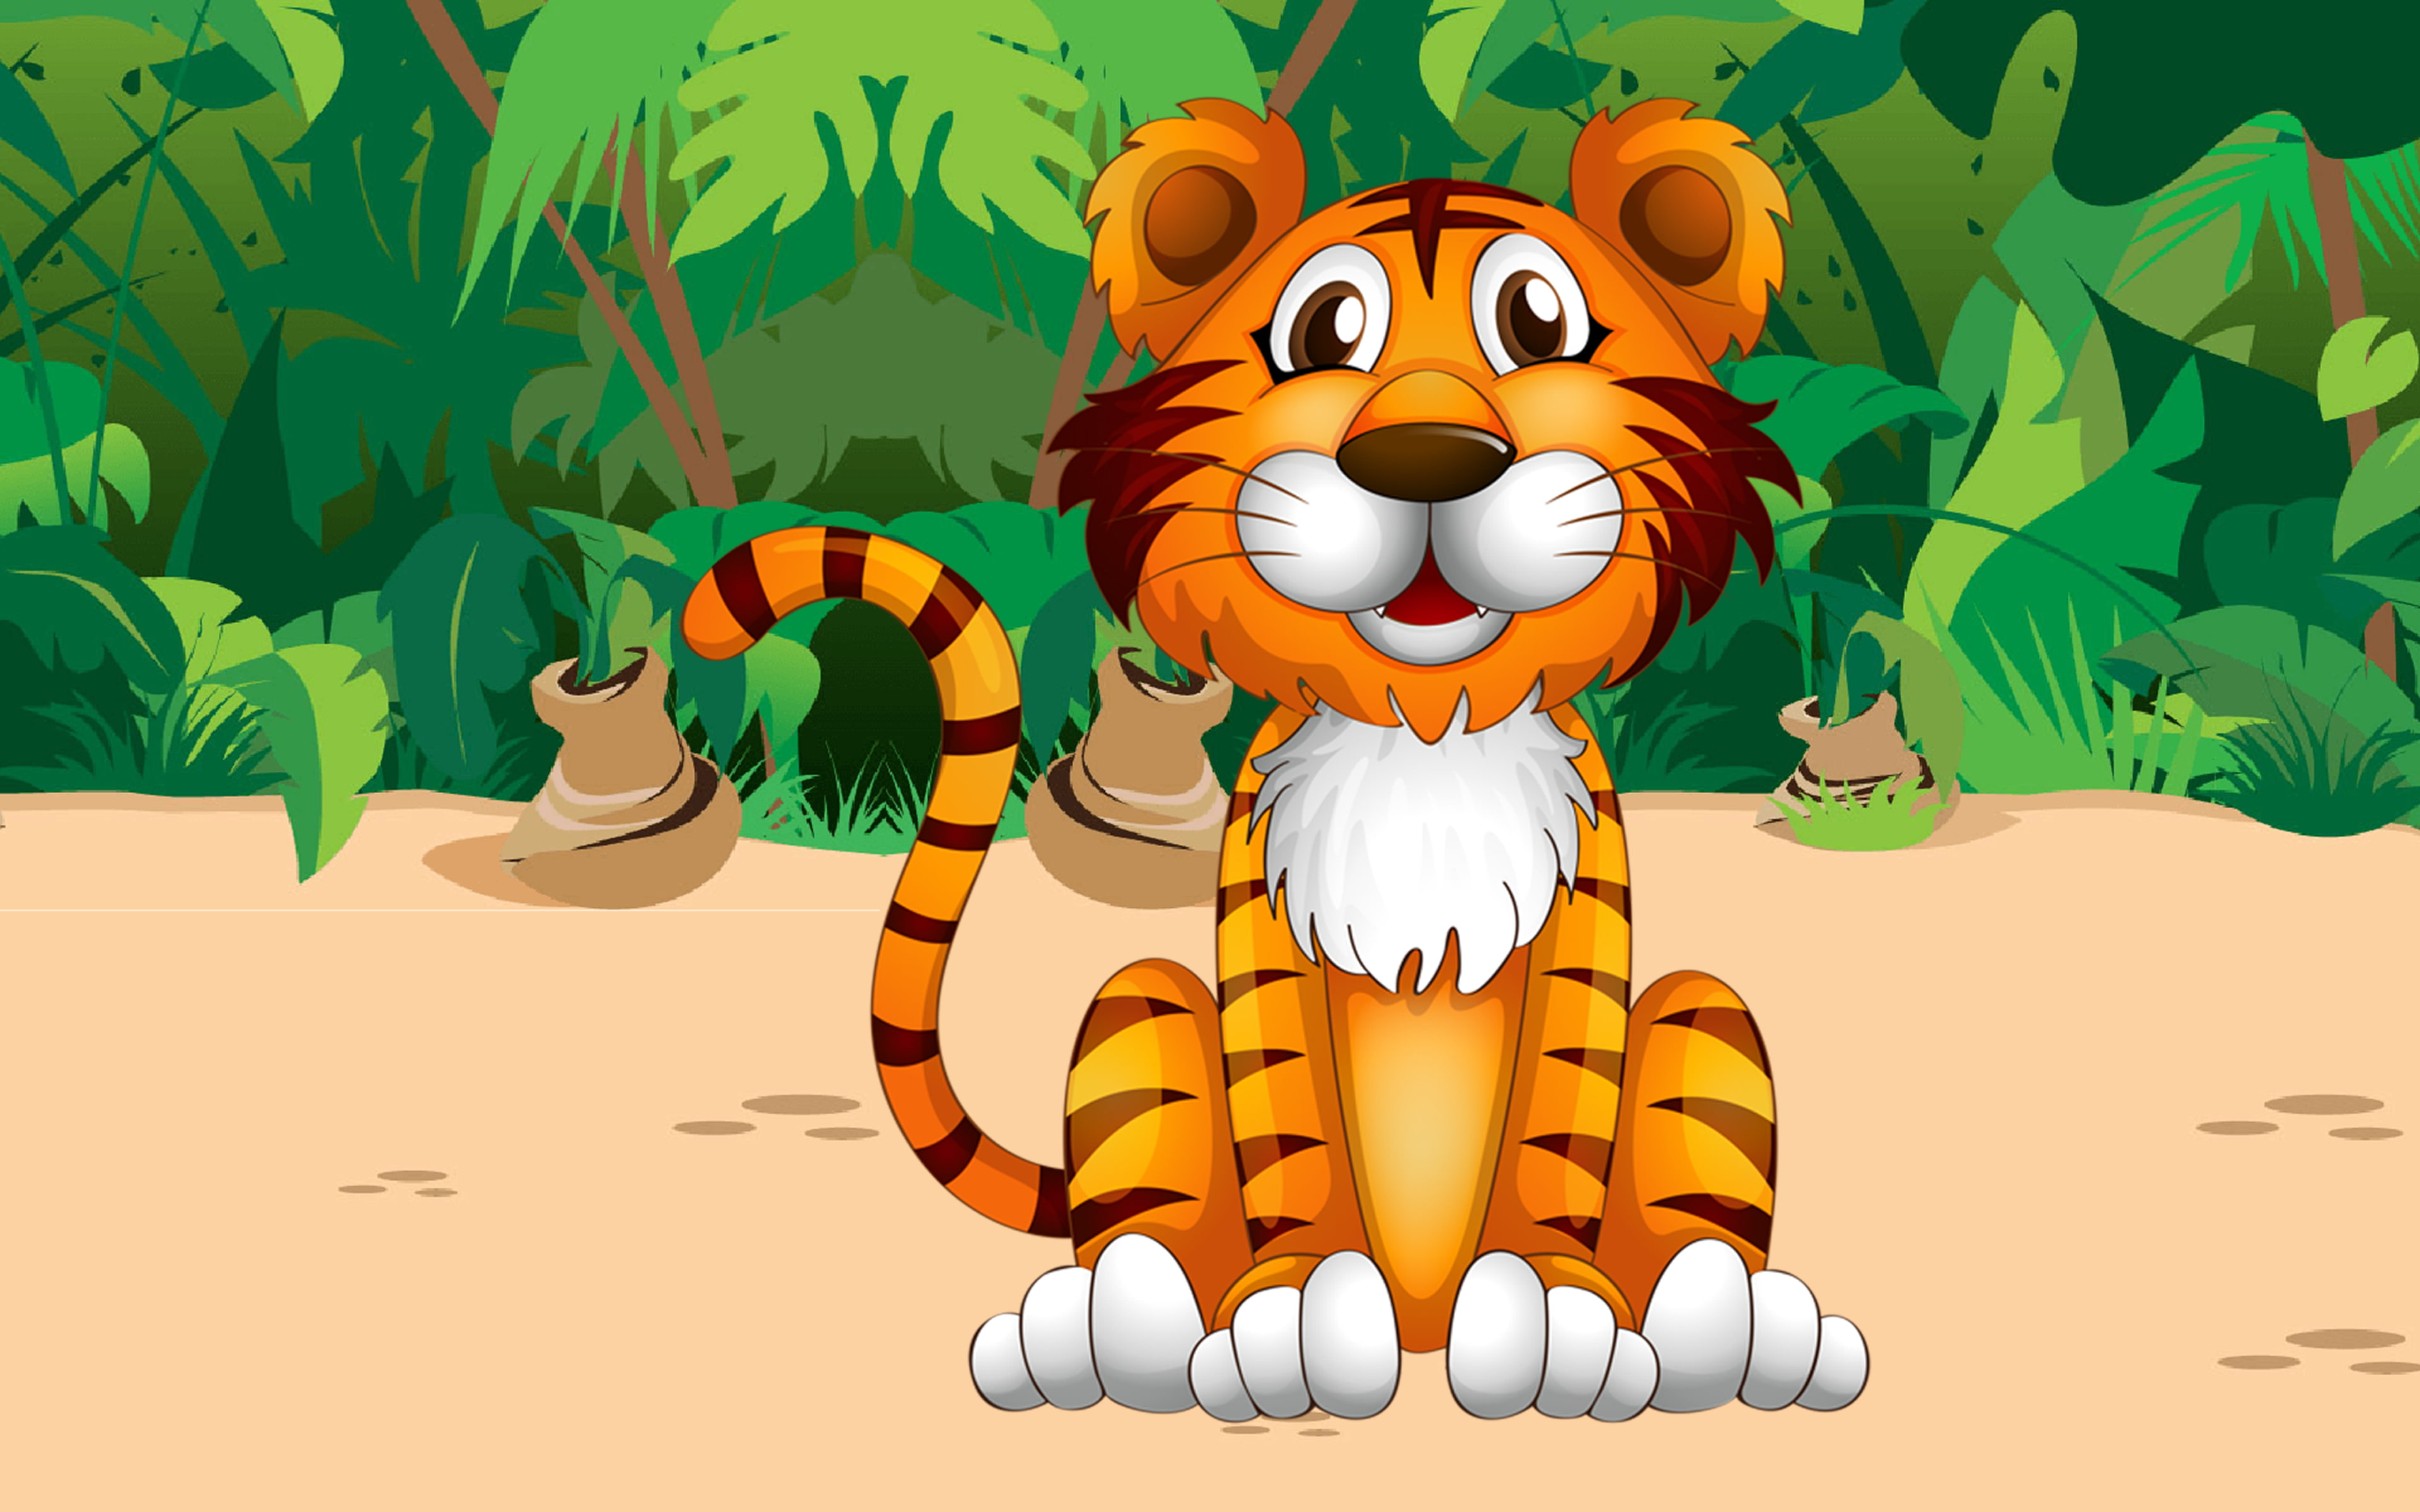 Cute Tiger Jungle Plant Cartoon Picture Pretty Desktop Hd Wallpaper For Mobile Phones Tablet And Pc 3840×2400